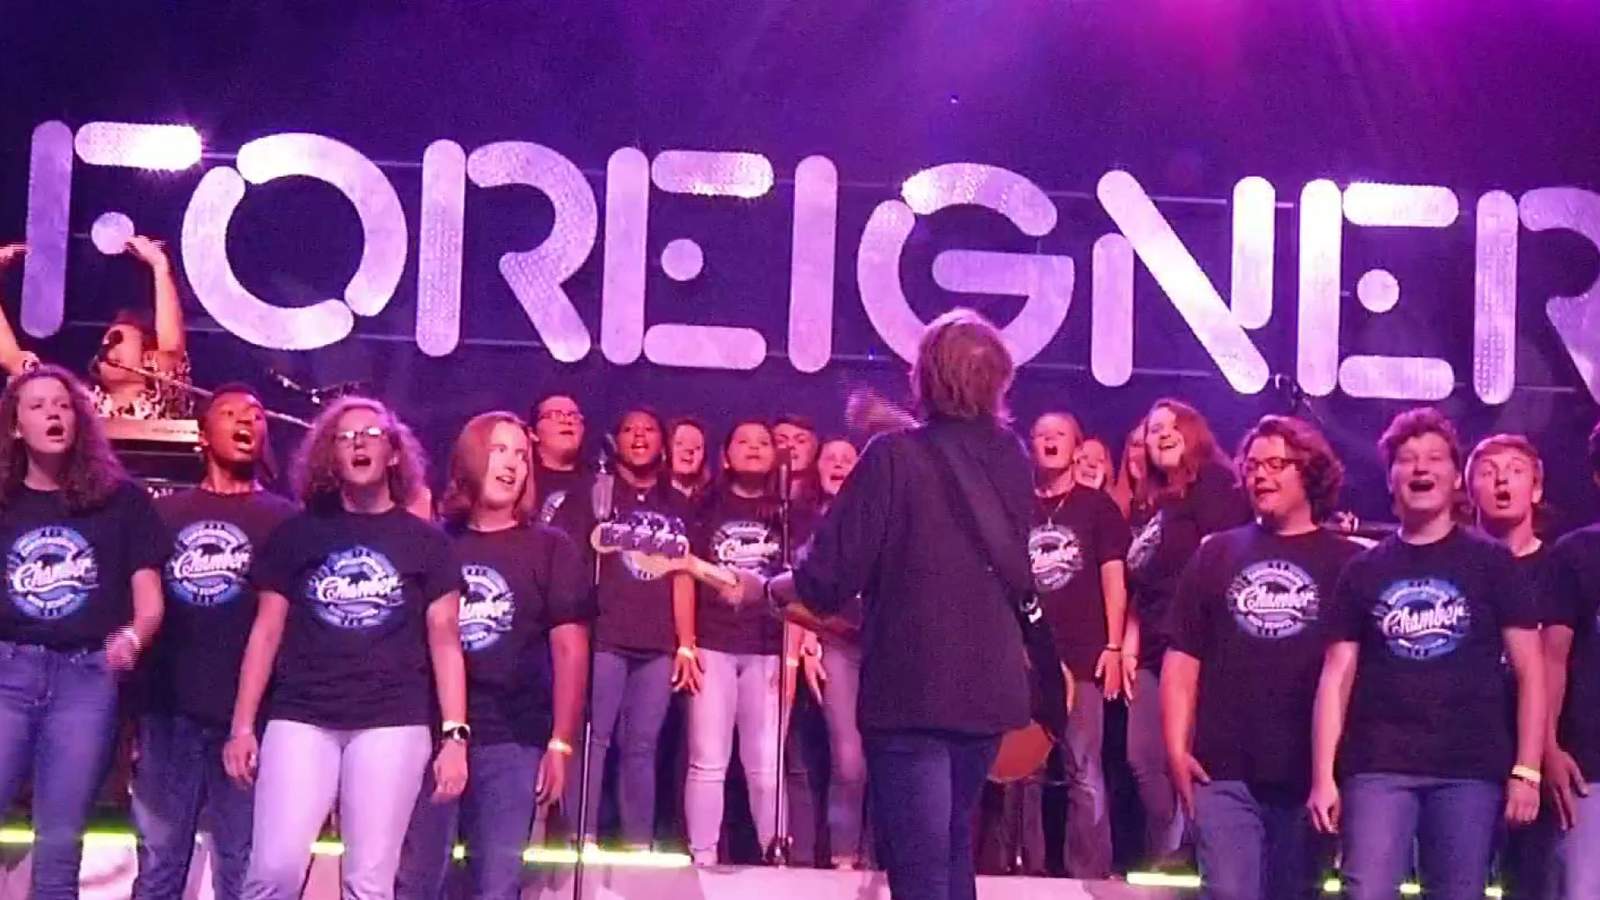 Christiansburg High School performs with Foreigner in front of sold-out crowd